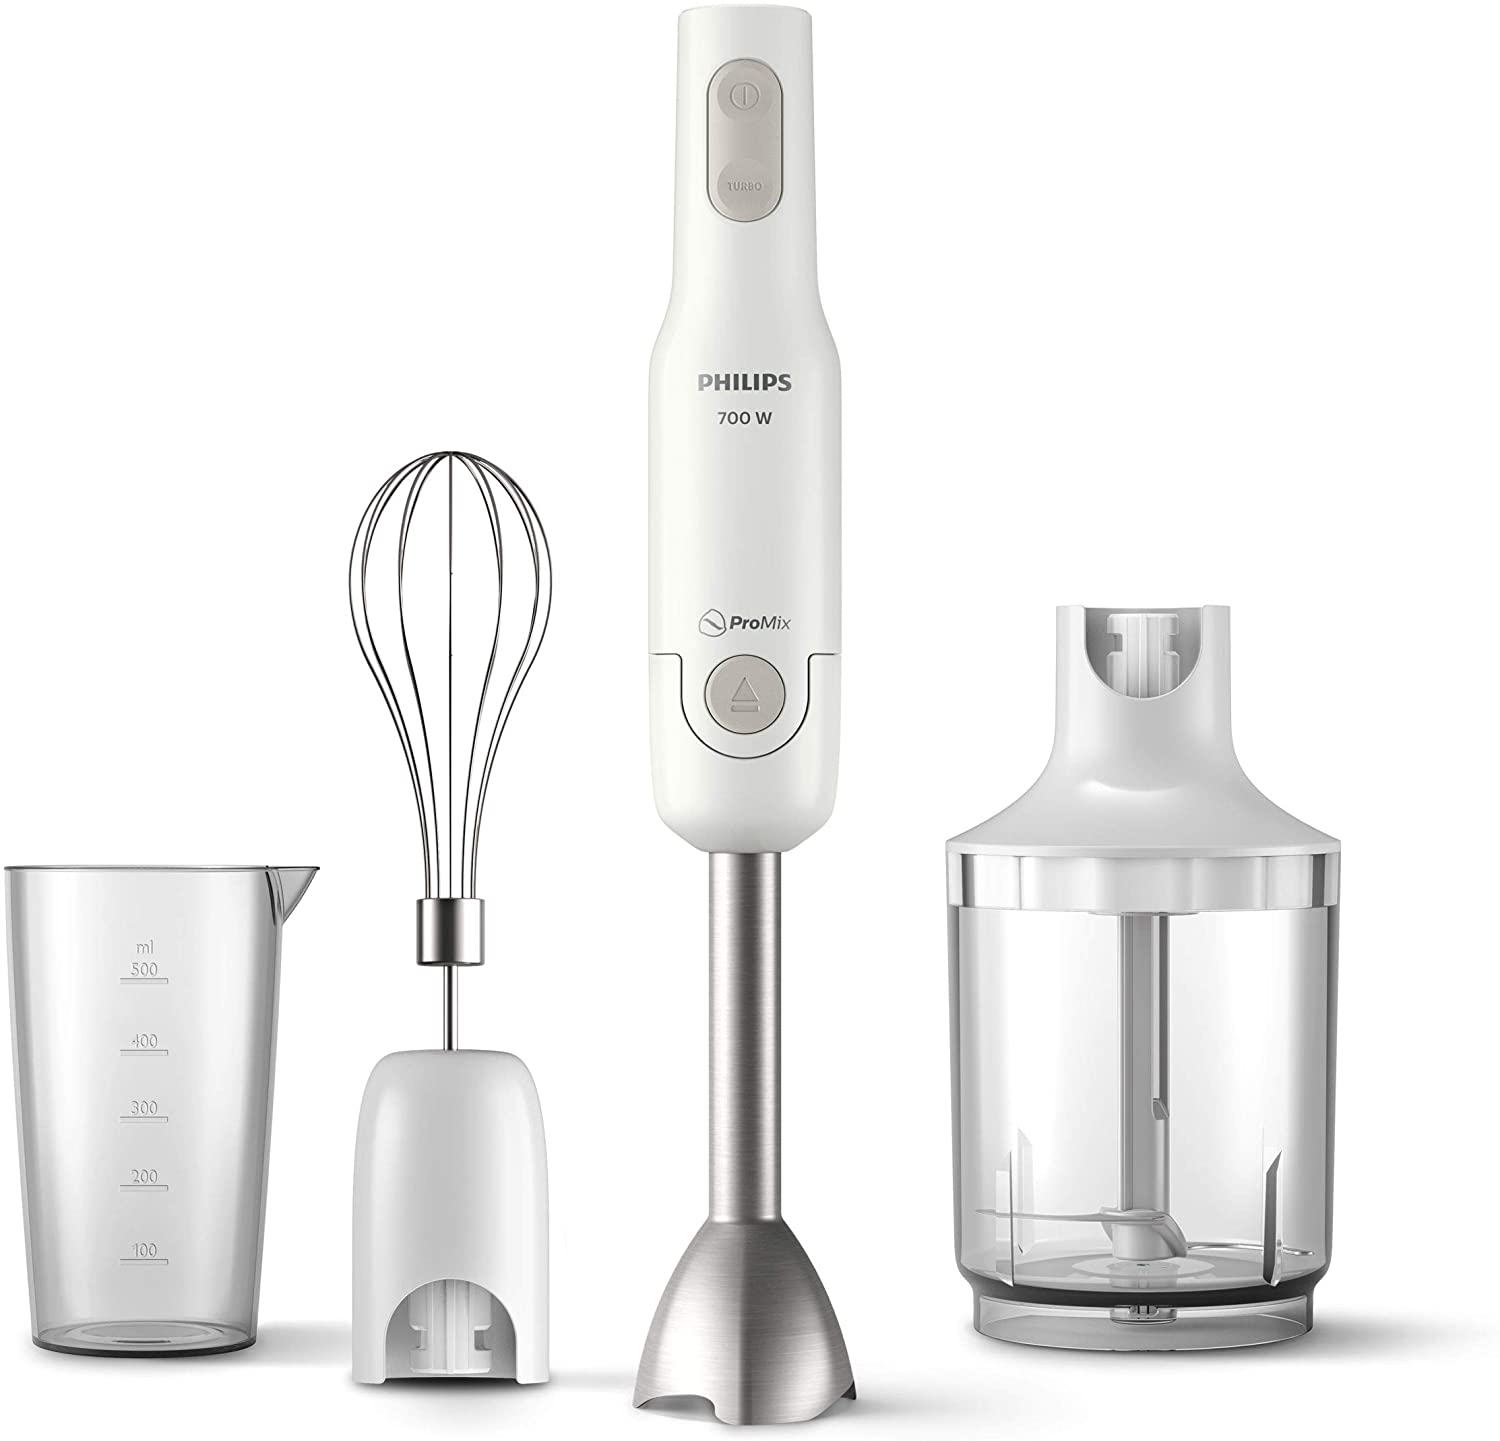 Philips Daily Collection Pro Mix Hand Blender, White - HR2545/01